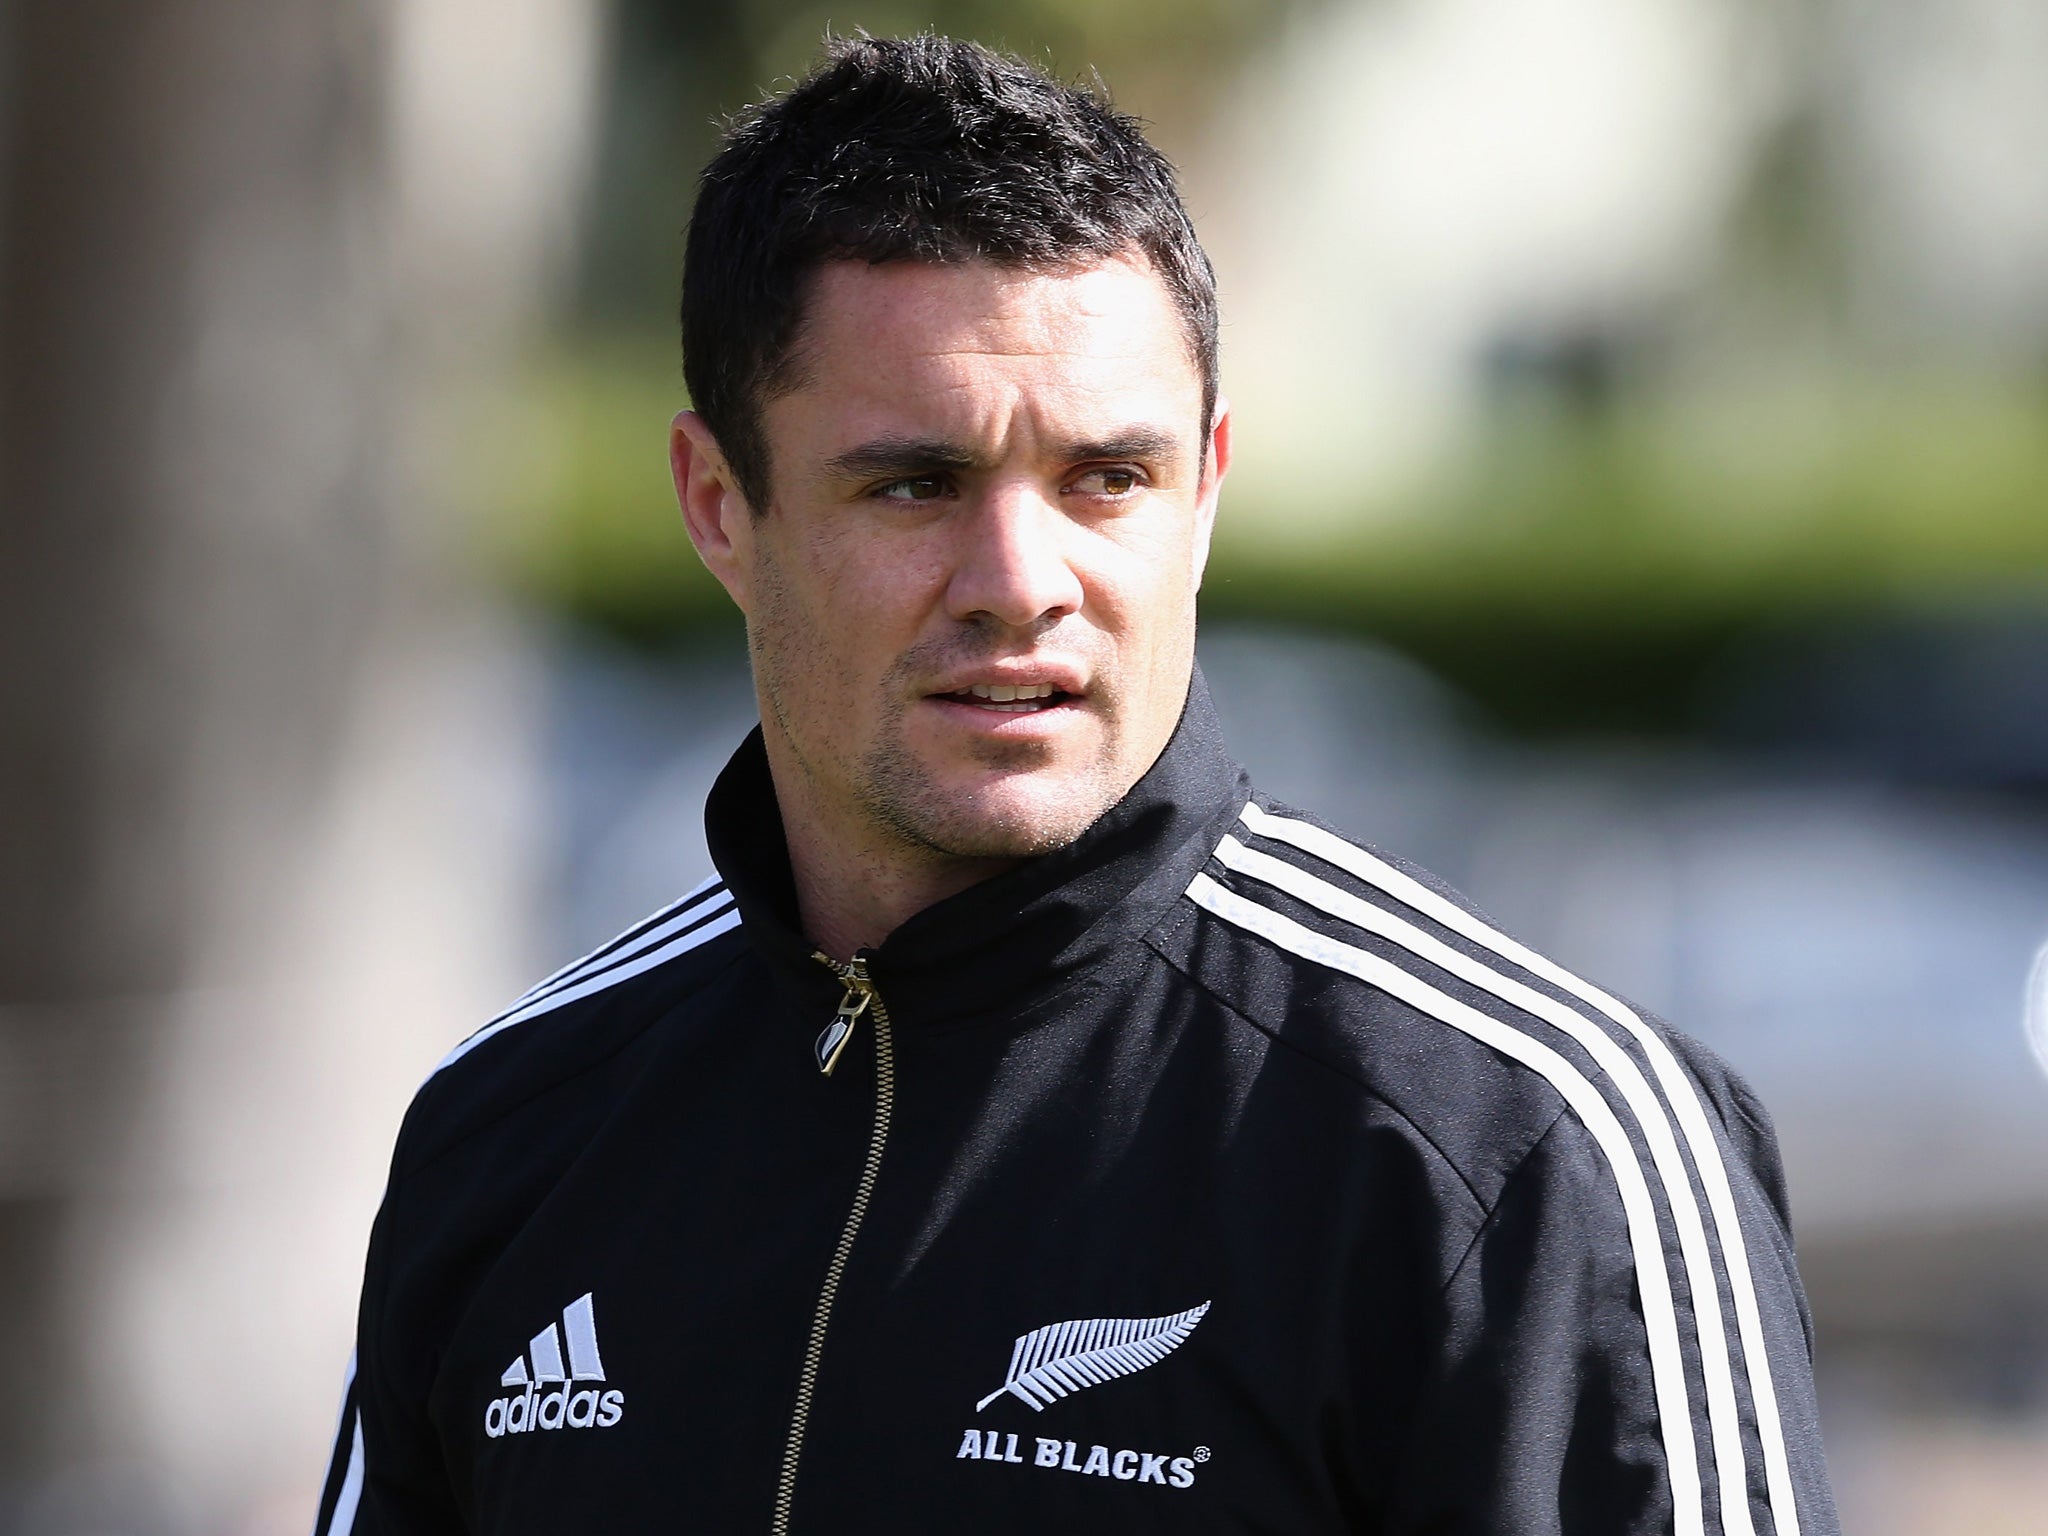 Dan Carter was named Player of the Year for a second time, at the IRB's annual awards